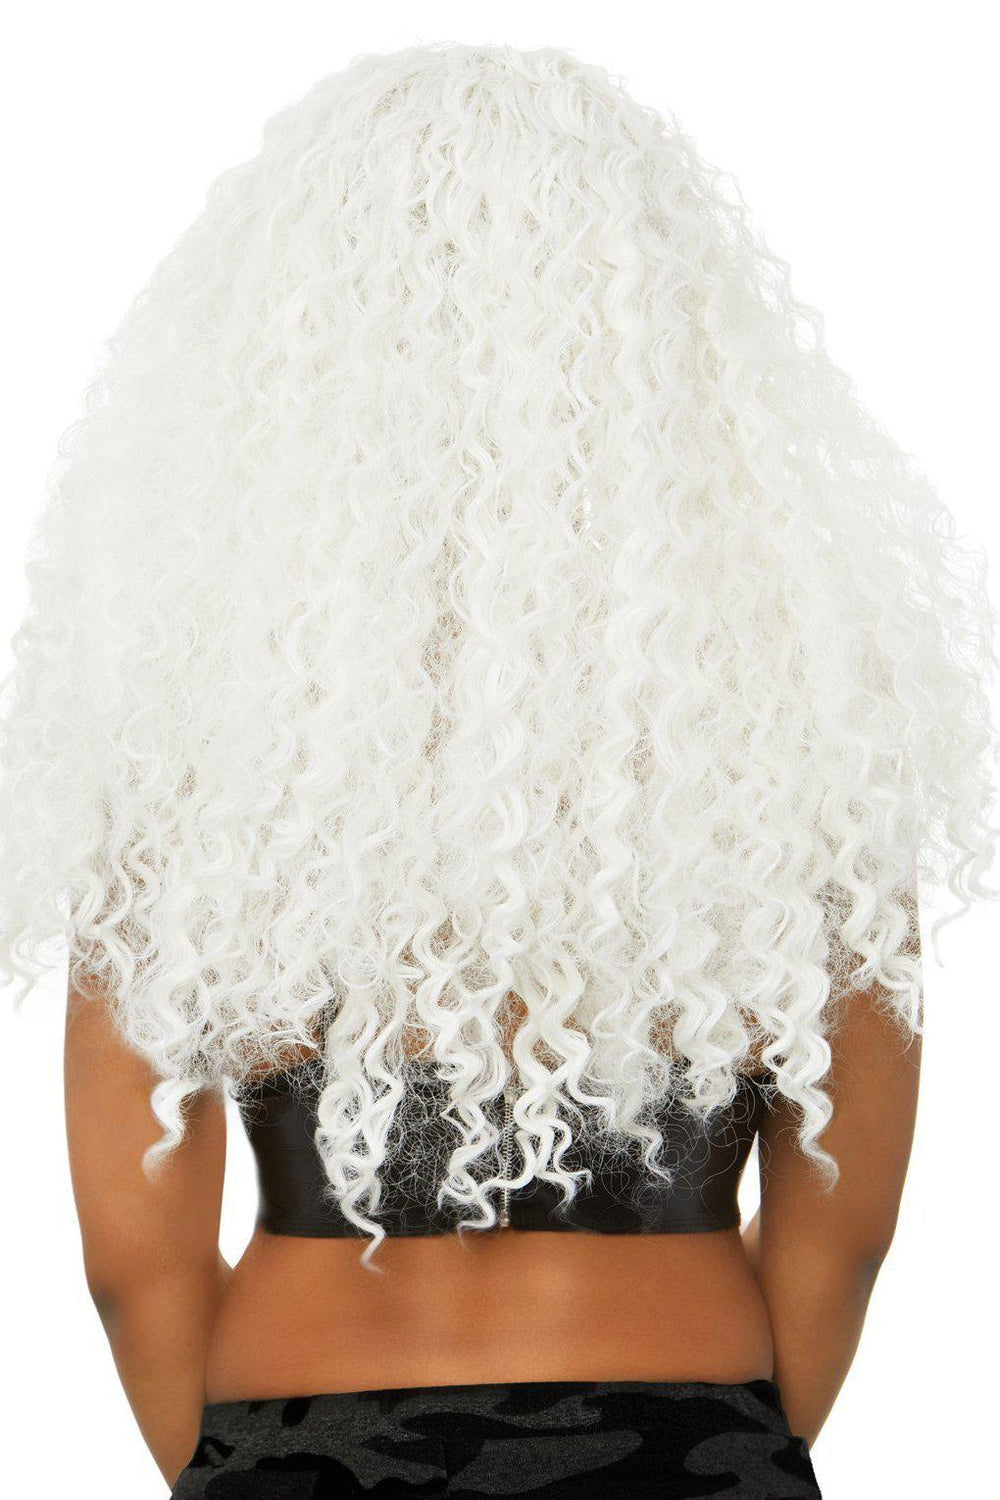 Long Curly Wig-Wigs-Leg Avenue-White-O/S-SEXYSHOES.COM